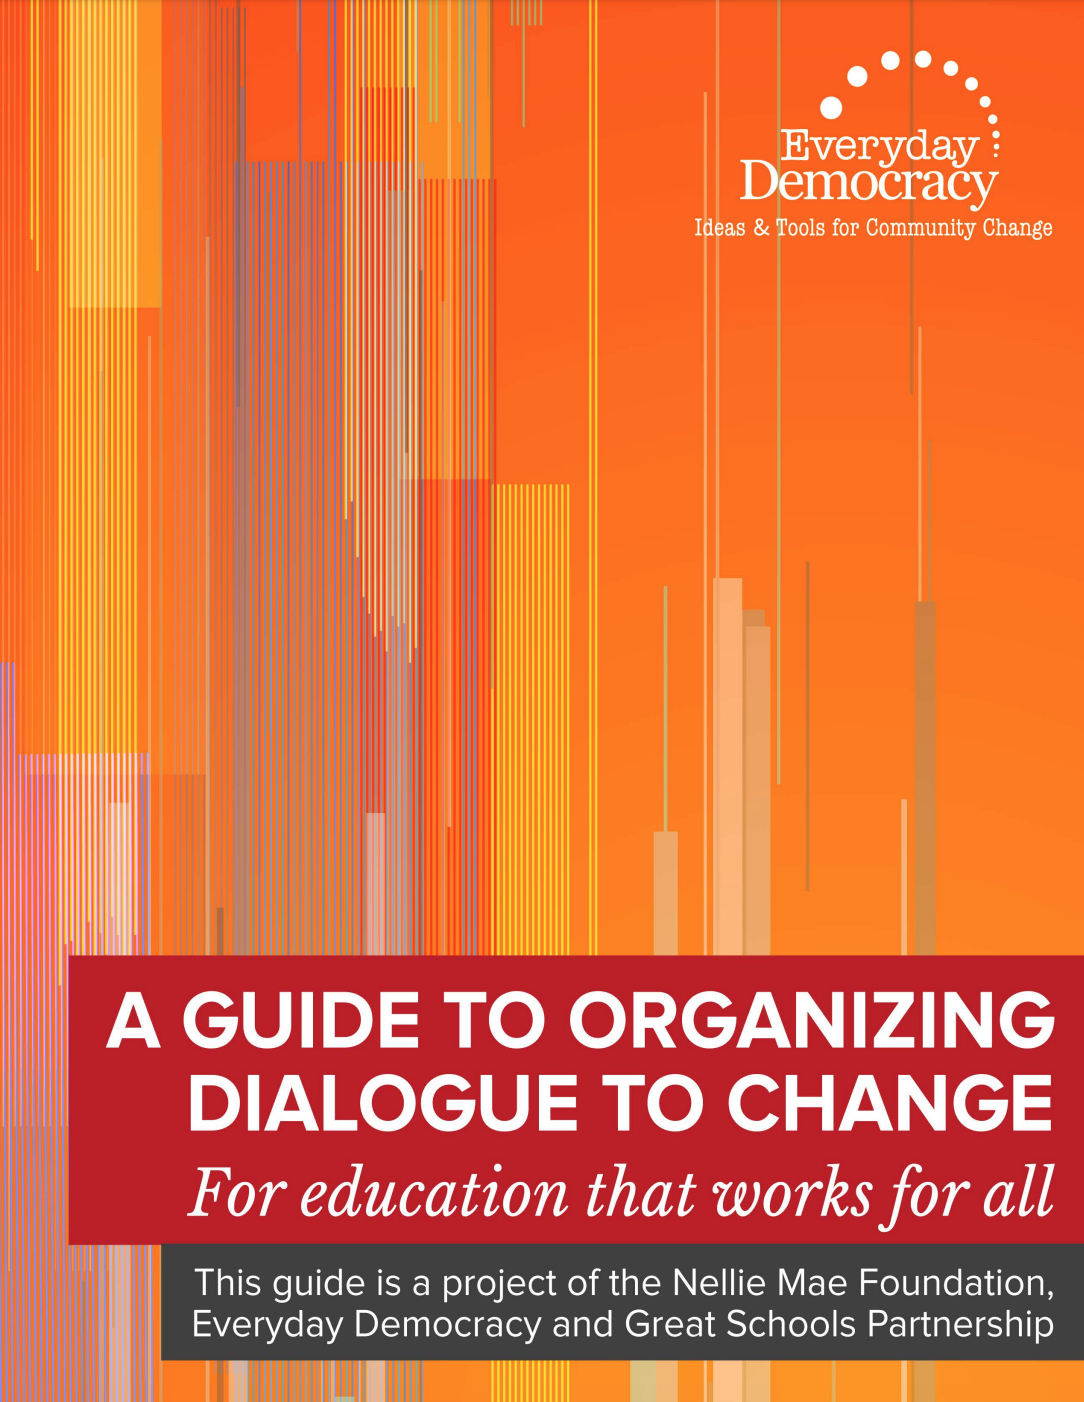 The cover image of Everyday Democracy's Guide to Organizing Dialogue to Change: For Education that Works for All